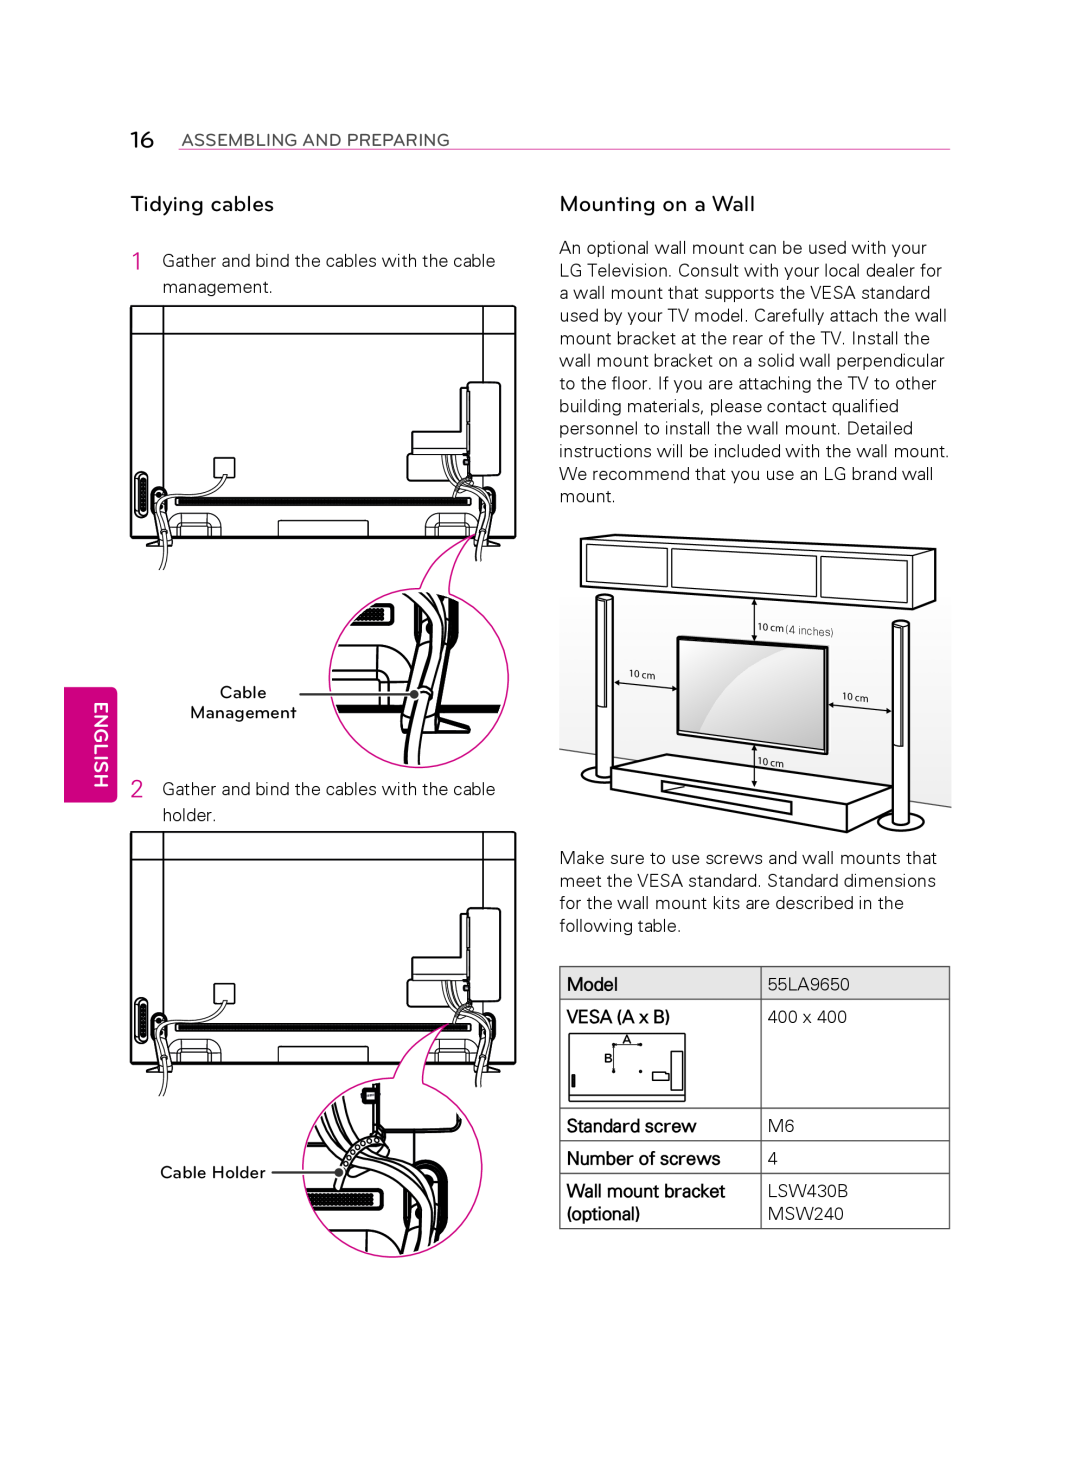 LG Electronics 55LA9650 owner manual Tidying cables, Mounting on a wall, English, Assembling And Preparing 